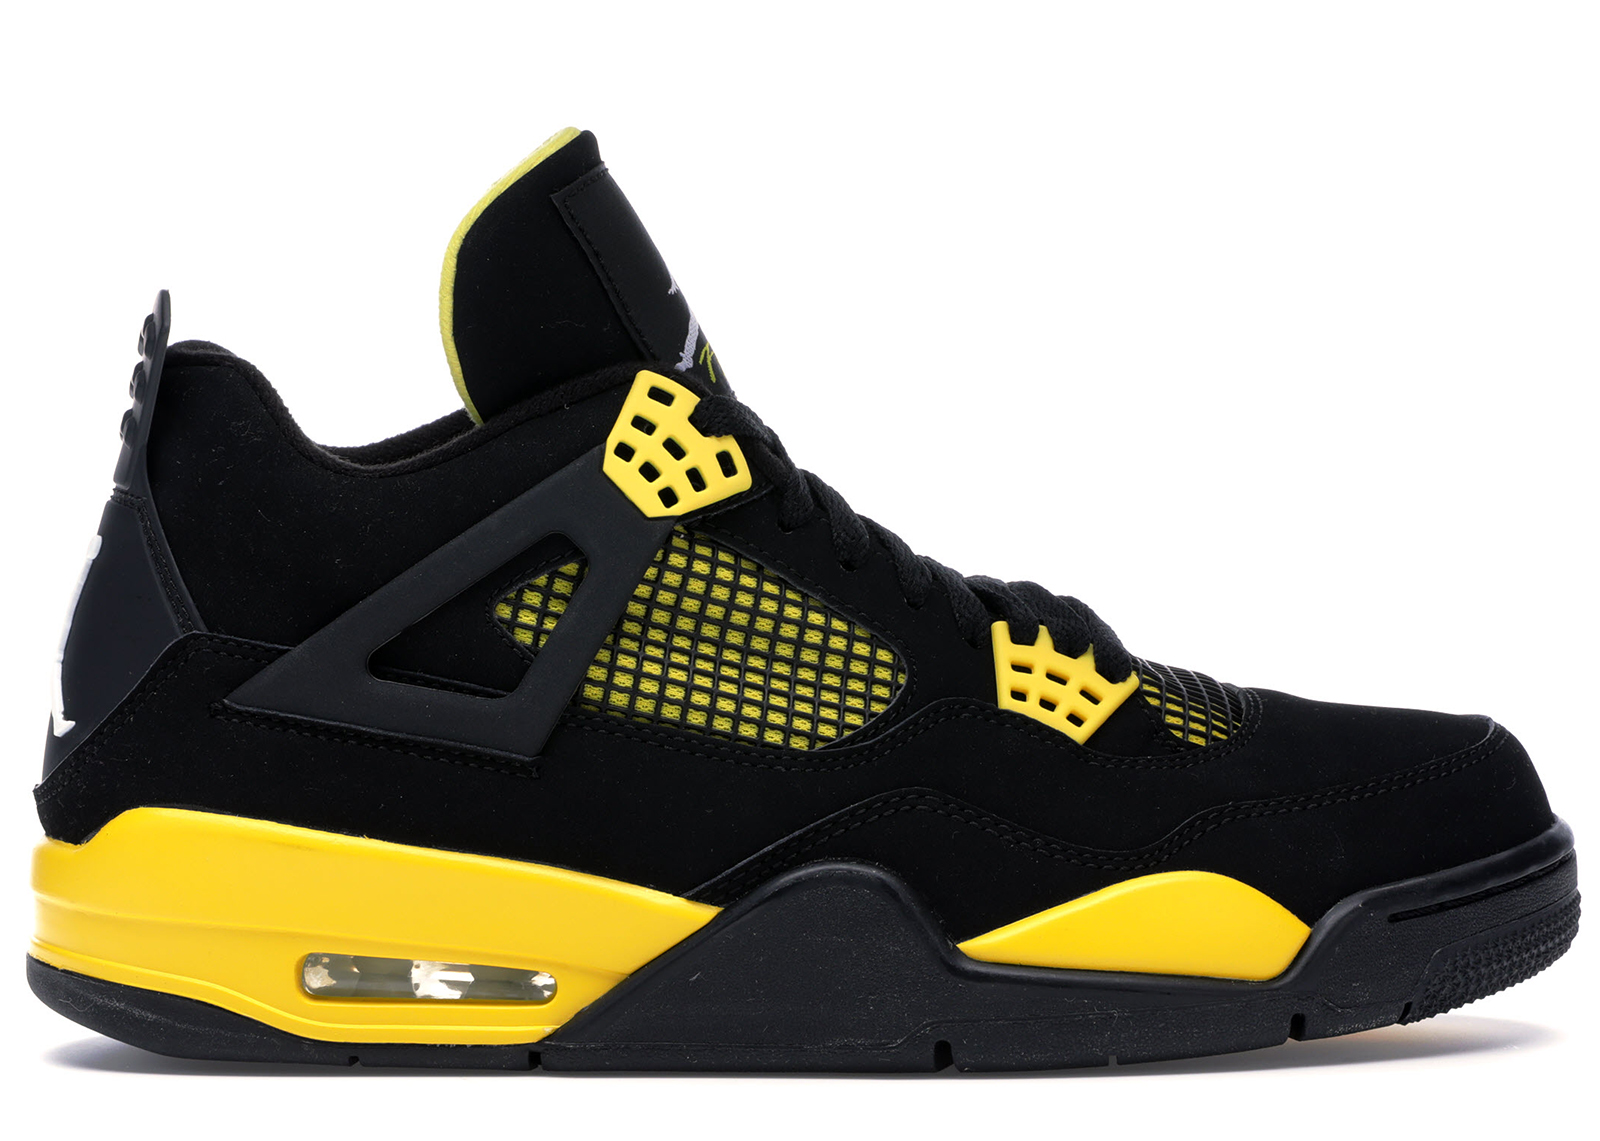 the black and yellow jordans